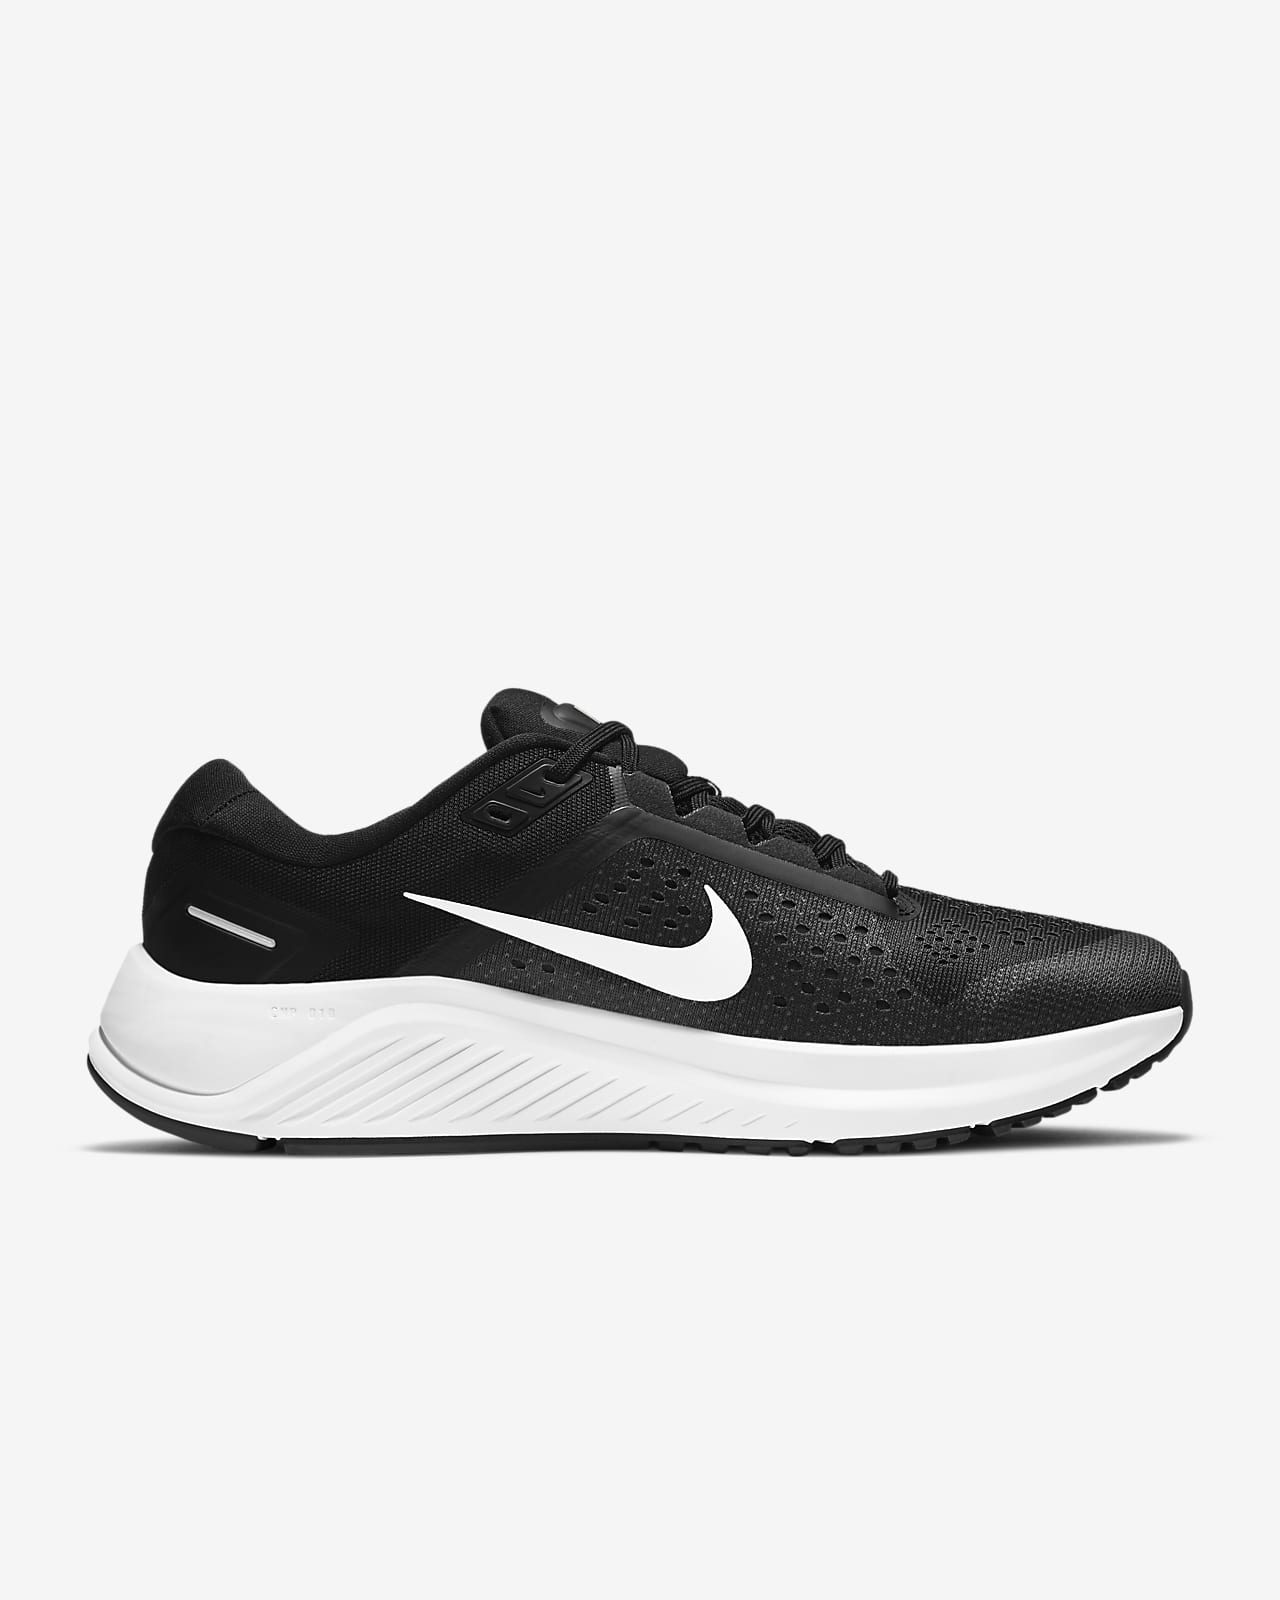 nike structure 23 men's